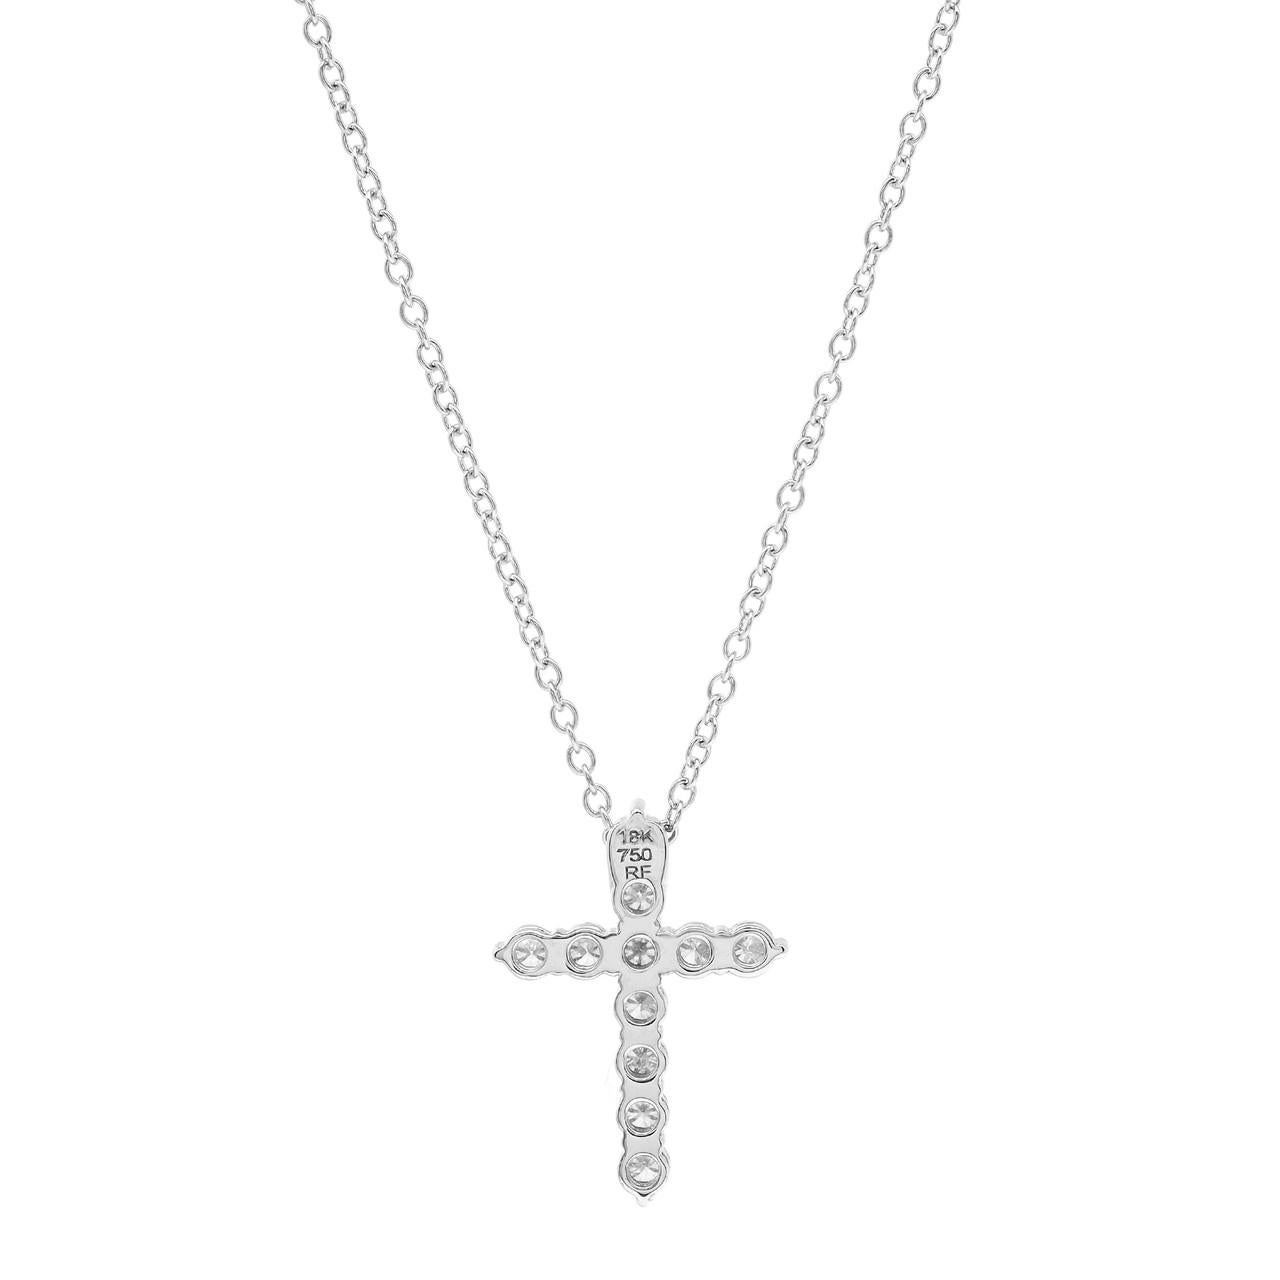 Presenting our stunning 1.01 Carat Diamond Cross Pendant Necklace in 18K White Gold! This necklace beautifully showcases your faith with a brilliant sparkle. The cross pendant is meticulously crafted with diamonds covering its surface, creating a